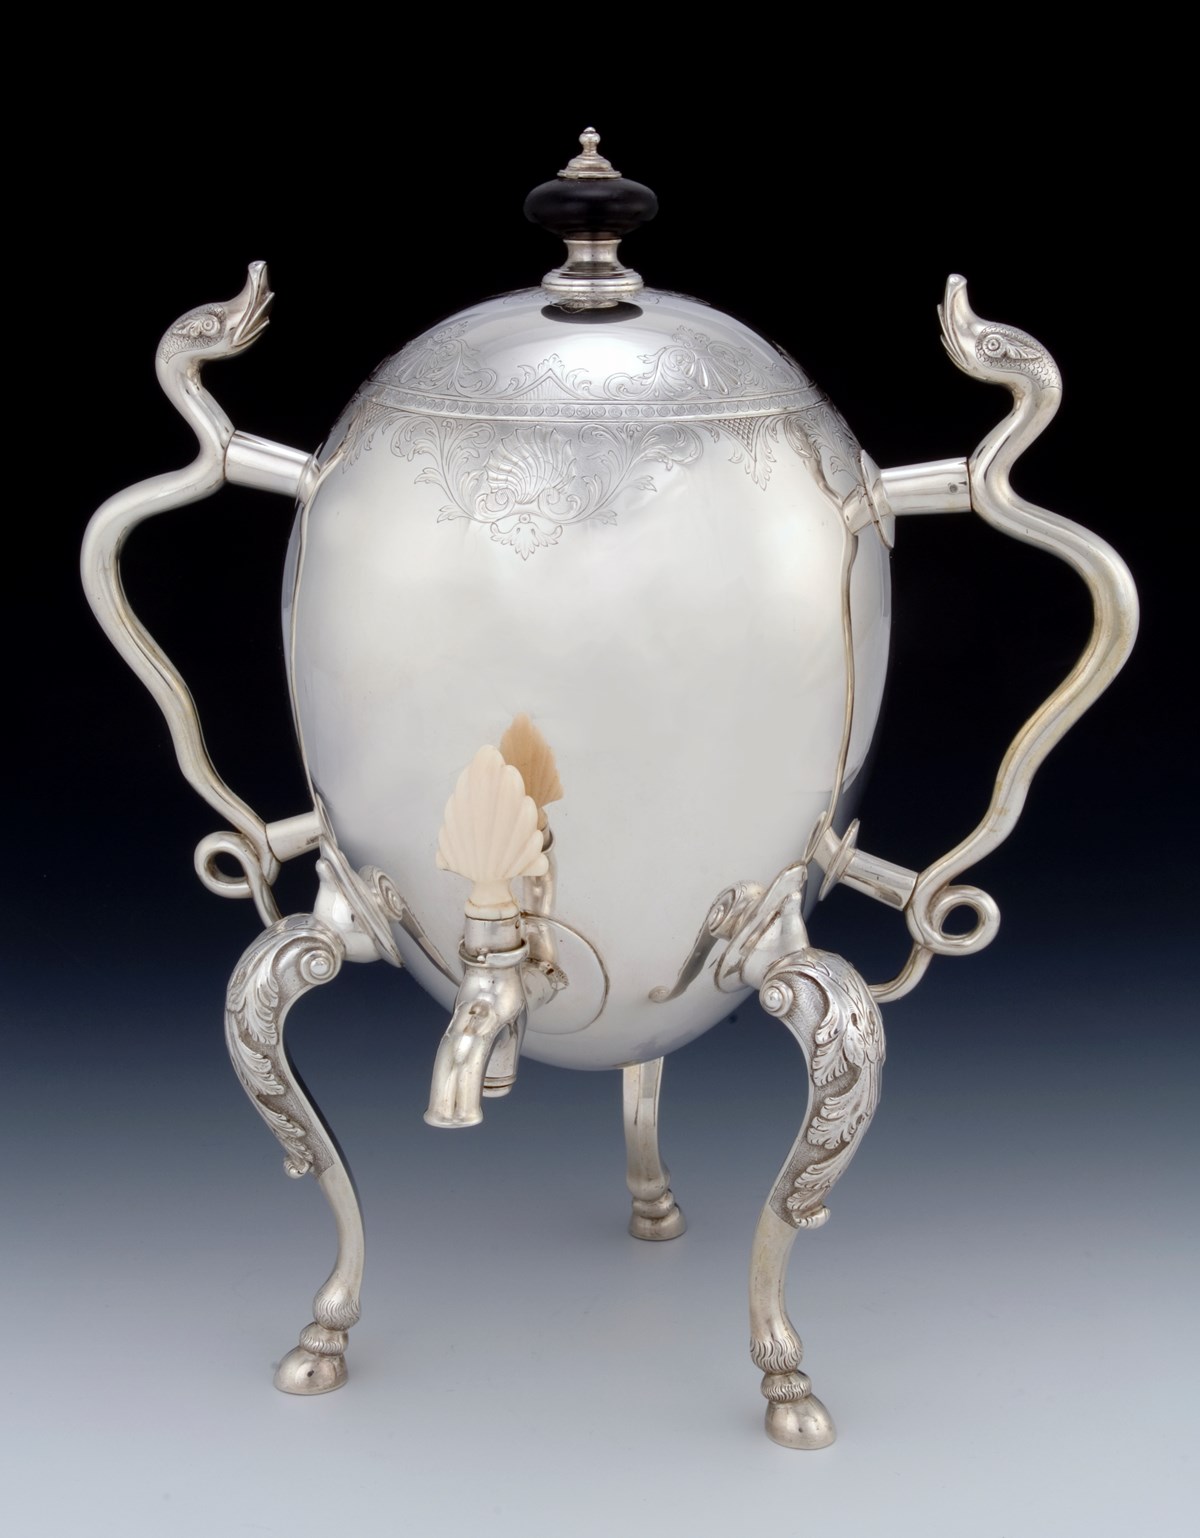 Silver coffee-urn with a plain ovoid body with a band of engraved decoration, Edinburgh, by John Rollo, 1735 1736 © National Museums Scotland